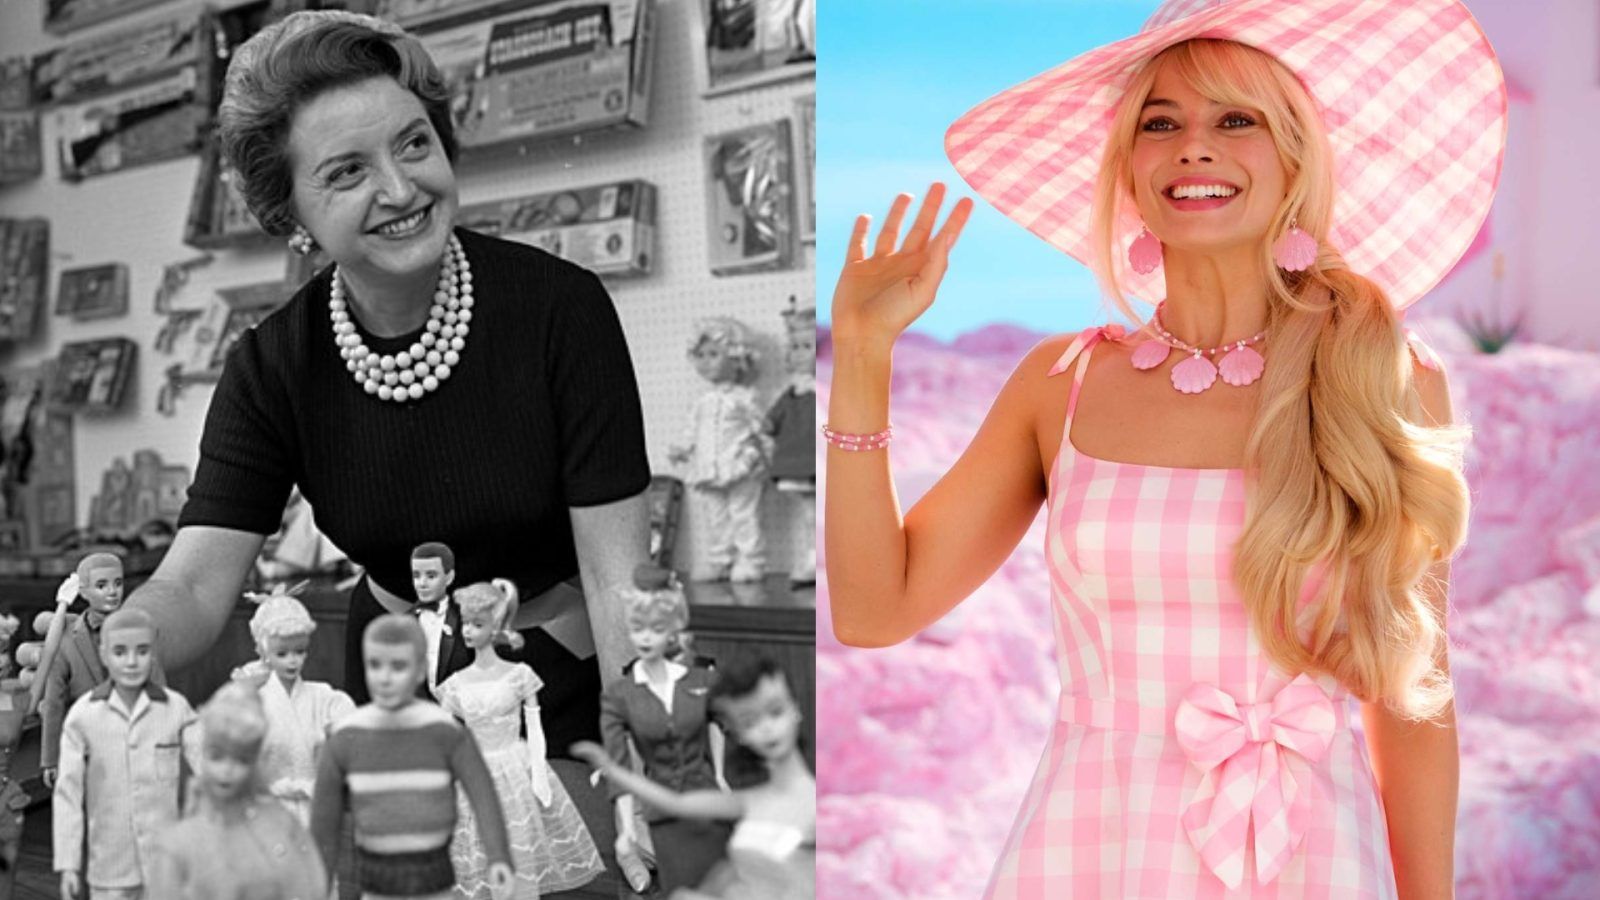 The real story of strong female leadership behind creation of Barbie doll